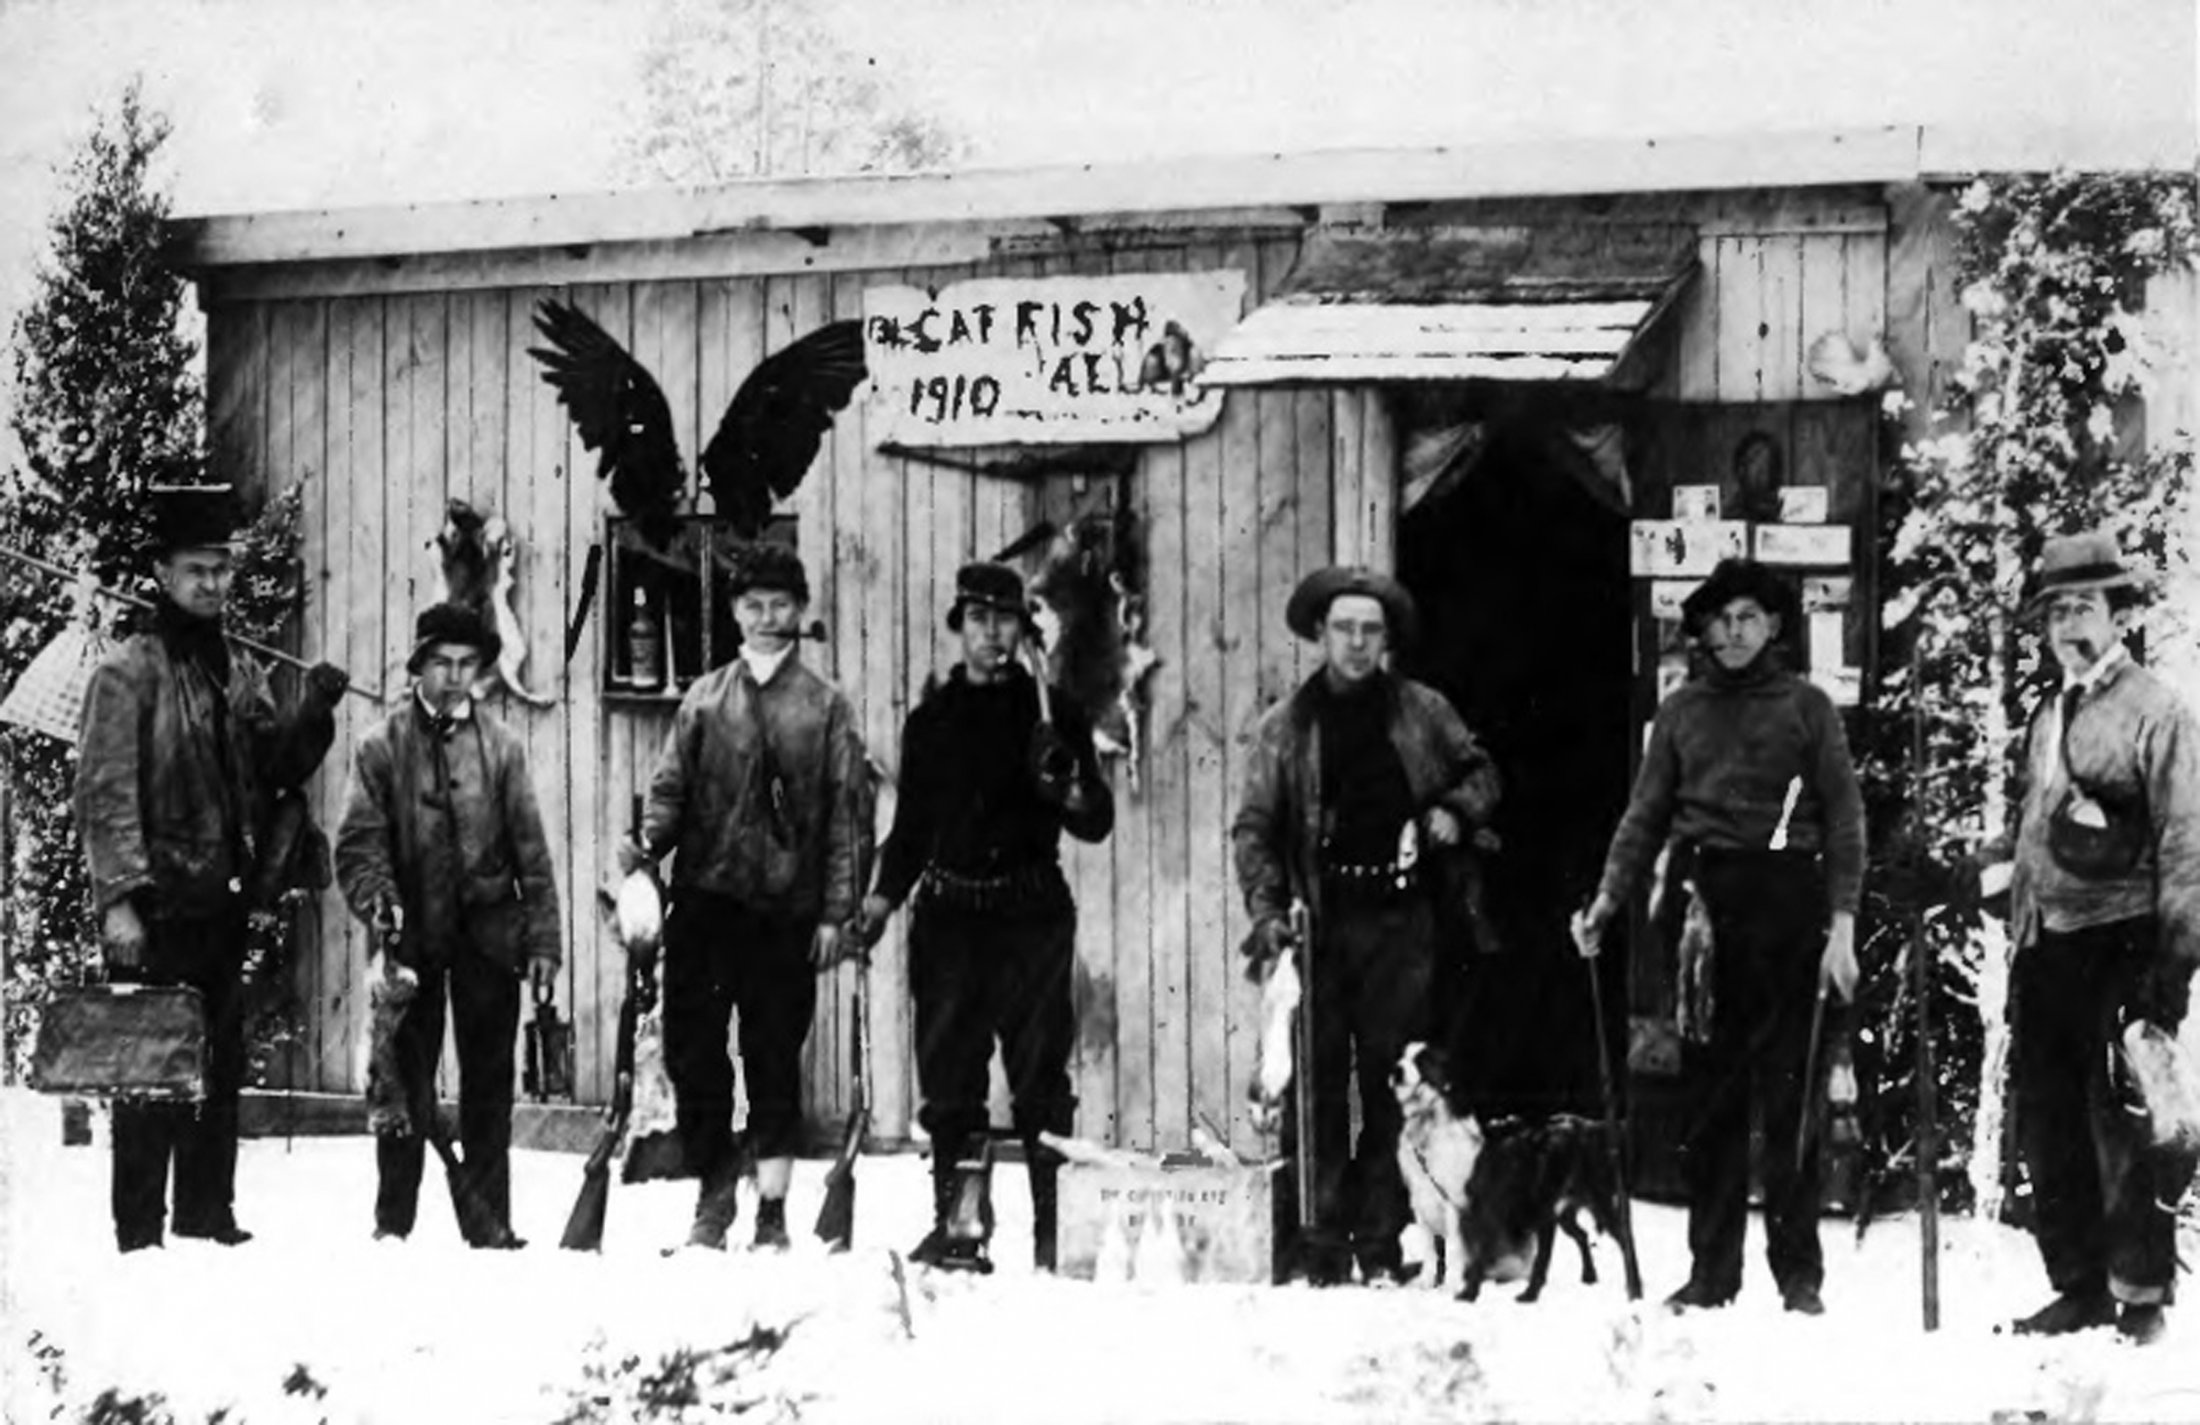 Egg Harbor City - The men of the Catfish Alley Clud back at their club house after a snowy but successful duck hunt - 1910 - EHC